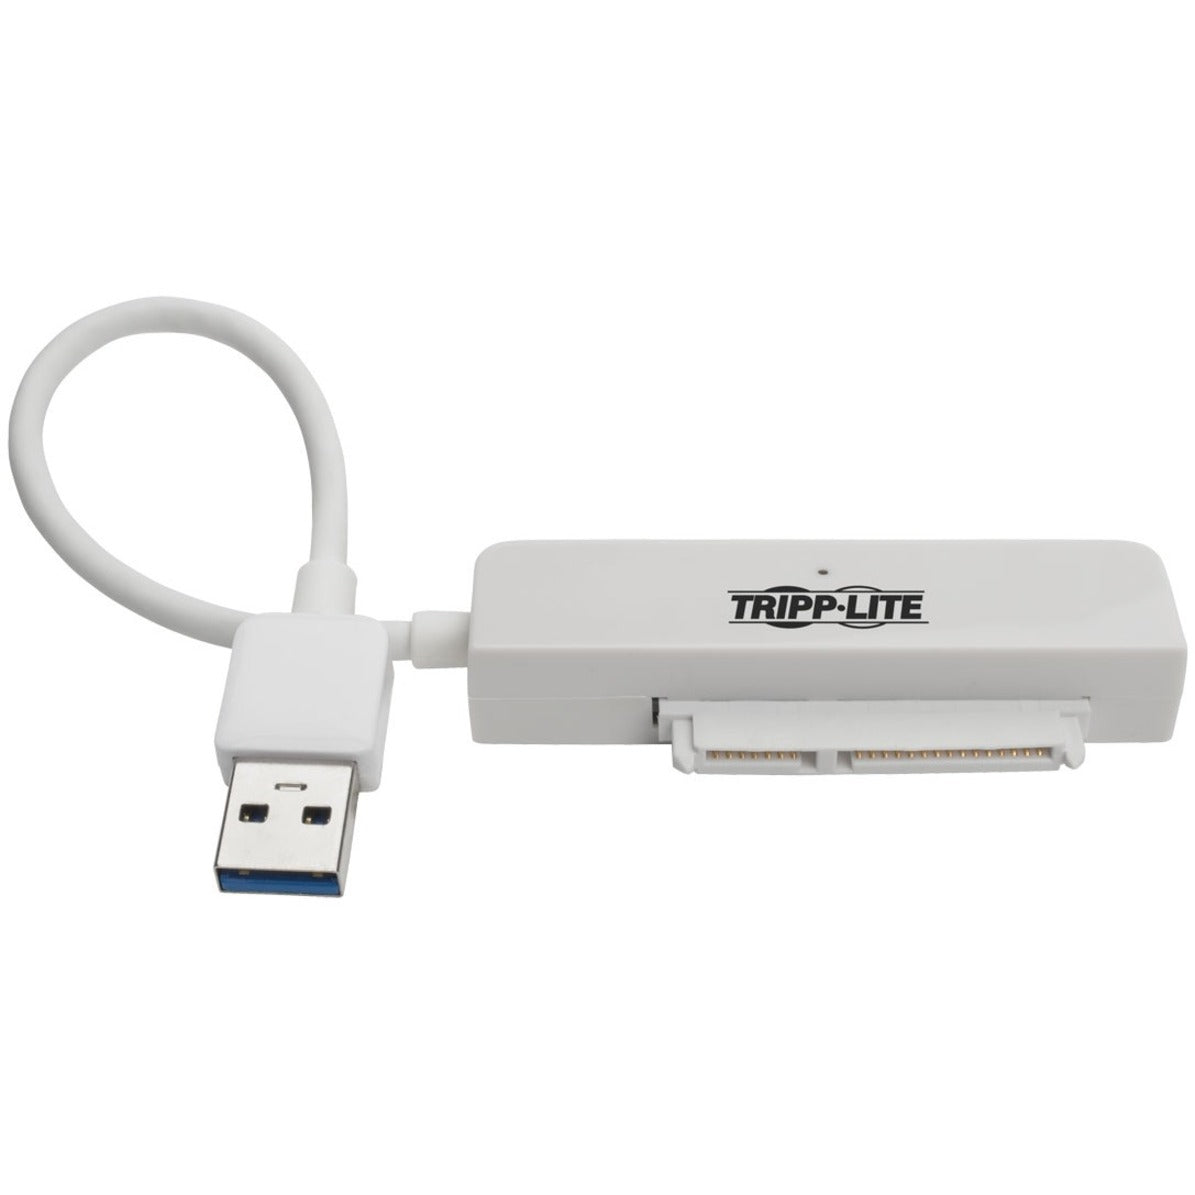 Tripp Lite U338-06N-SATA-W USB 3.0 SuperSpeed to SATA III Adapter Cable, White - Fast Data Transfer for Hard Drives and SSDs